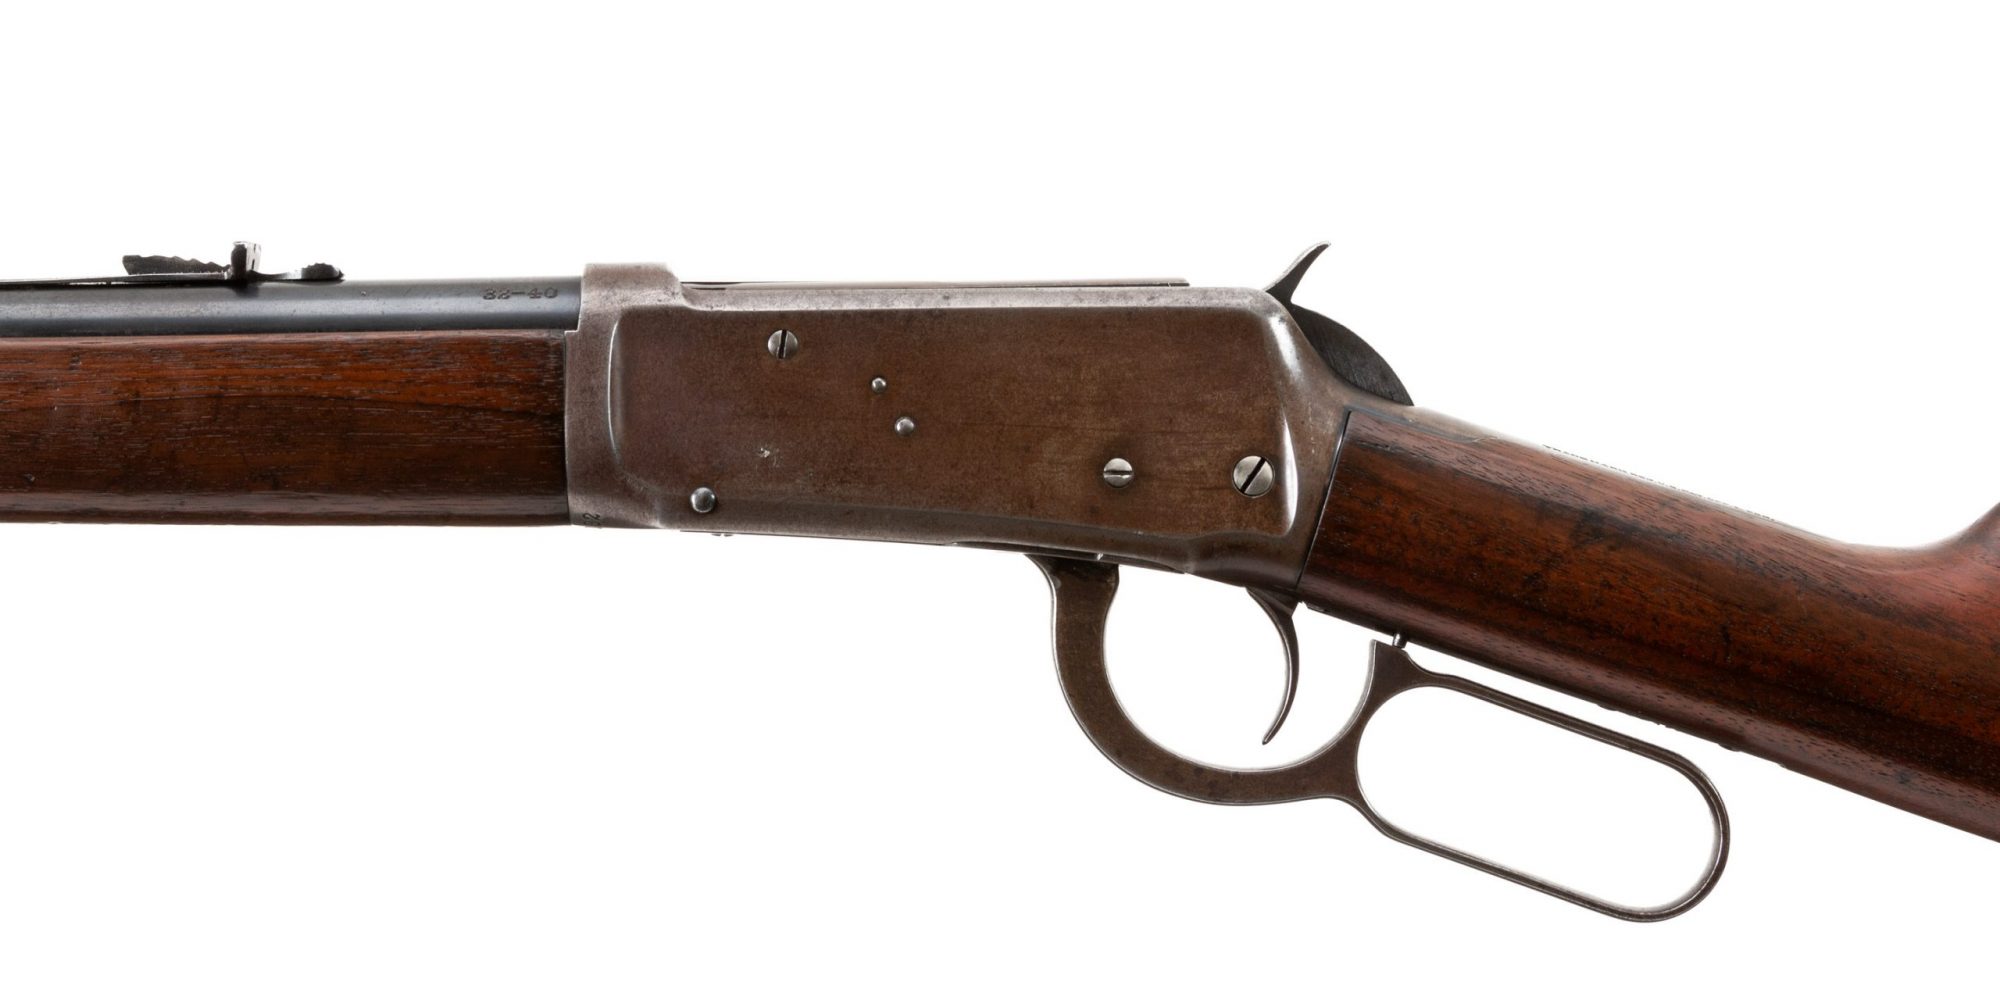 Photo of a pre-owned Winchester Model 94 from 1922, for sale by Turnbull Restoration of Bloomfield, NY